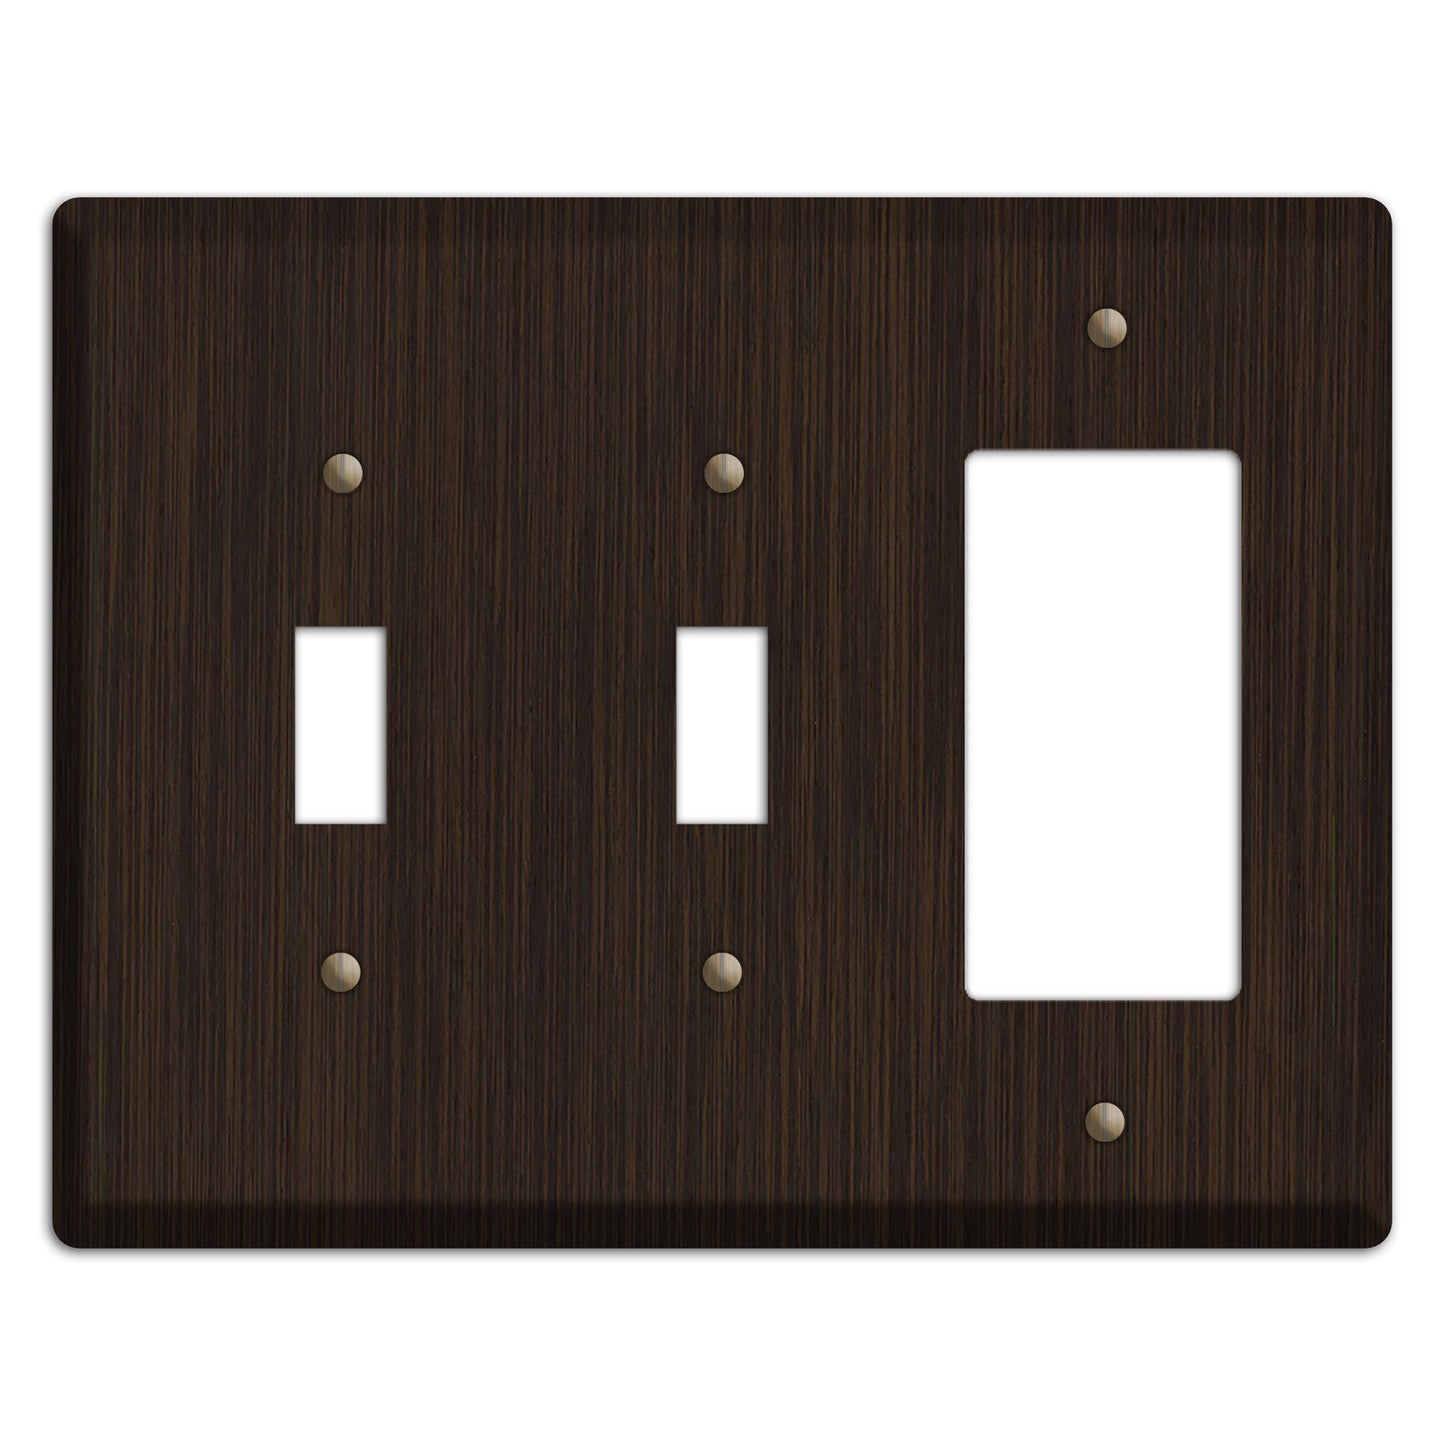 Wenge Wood 2 Toggle / Rocker Cover Plate